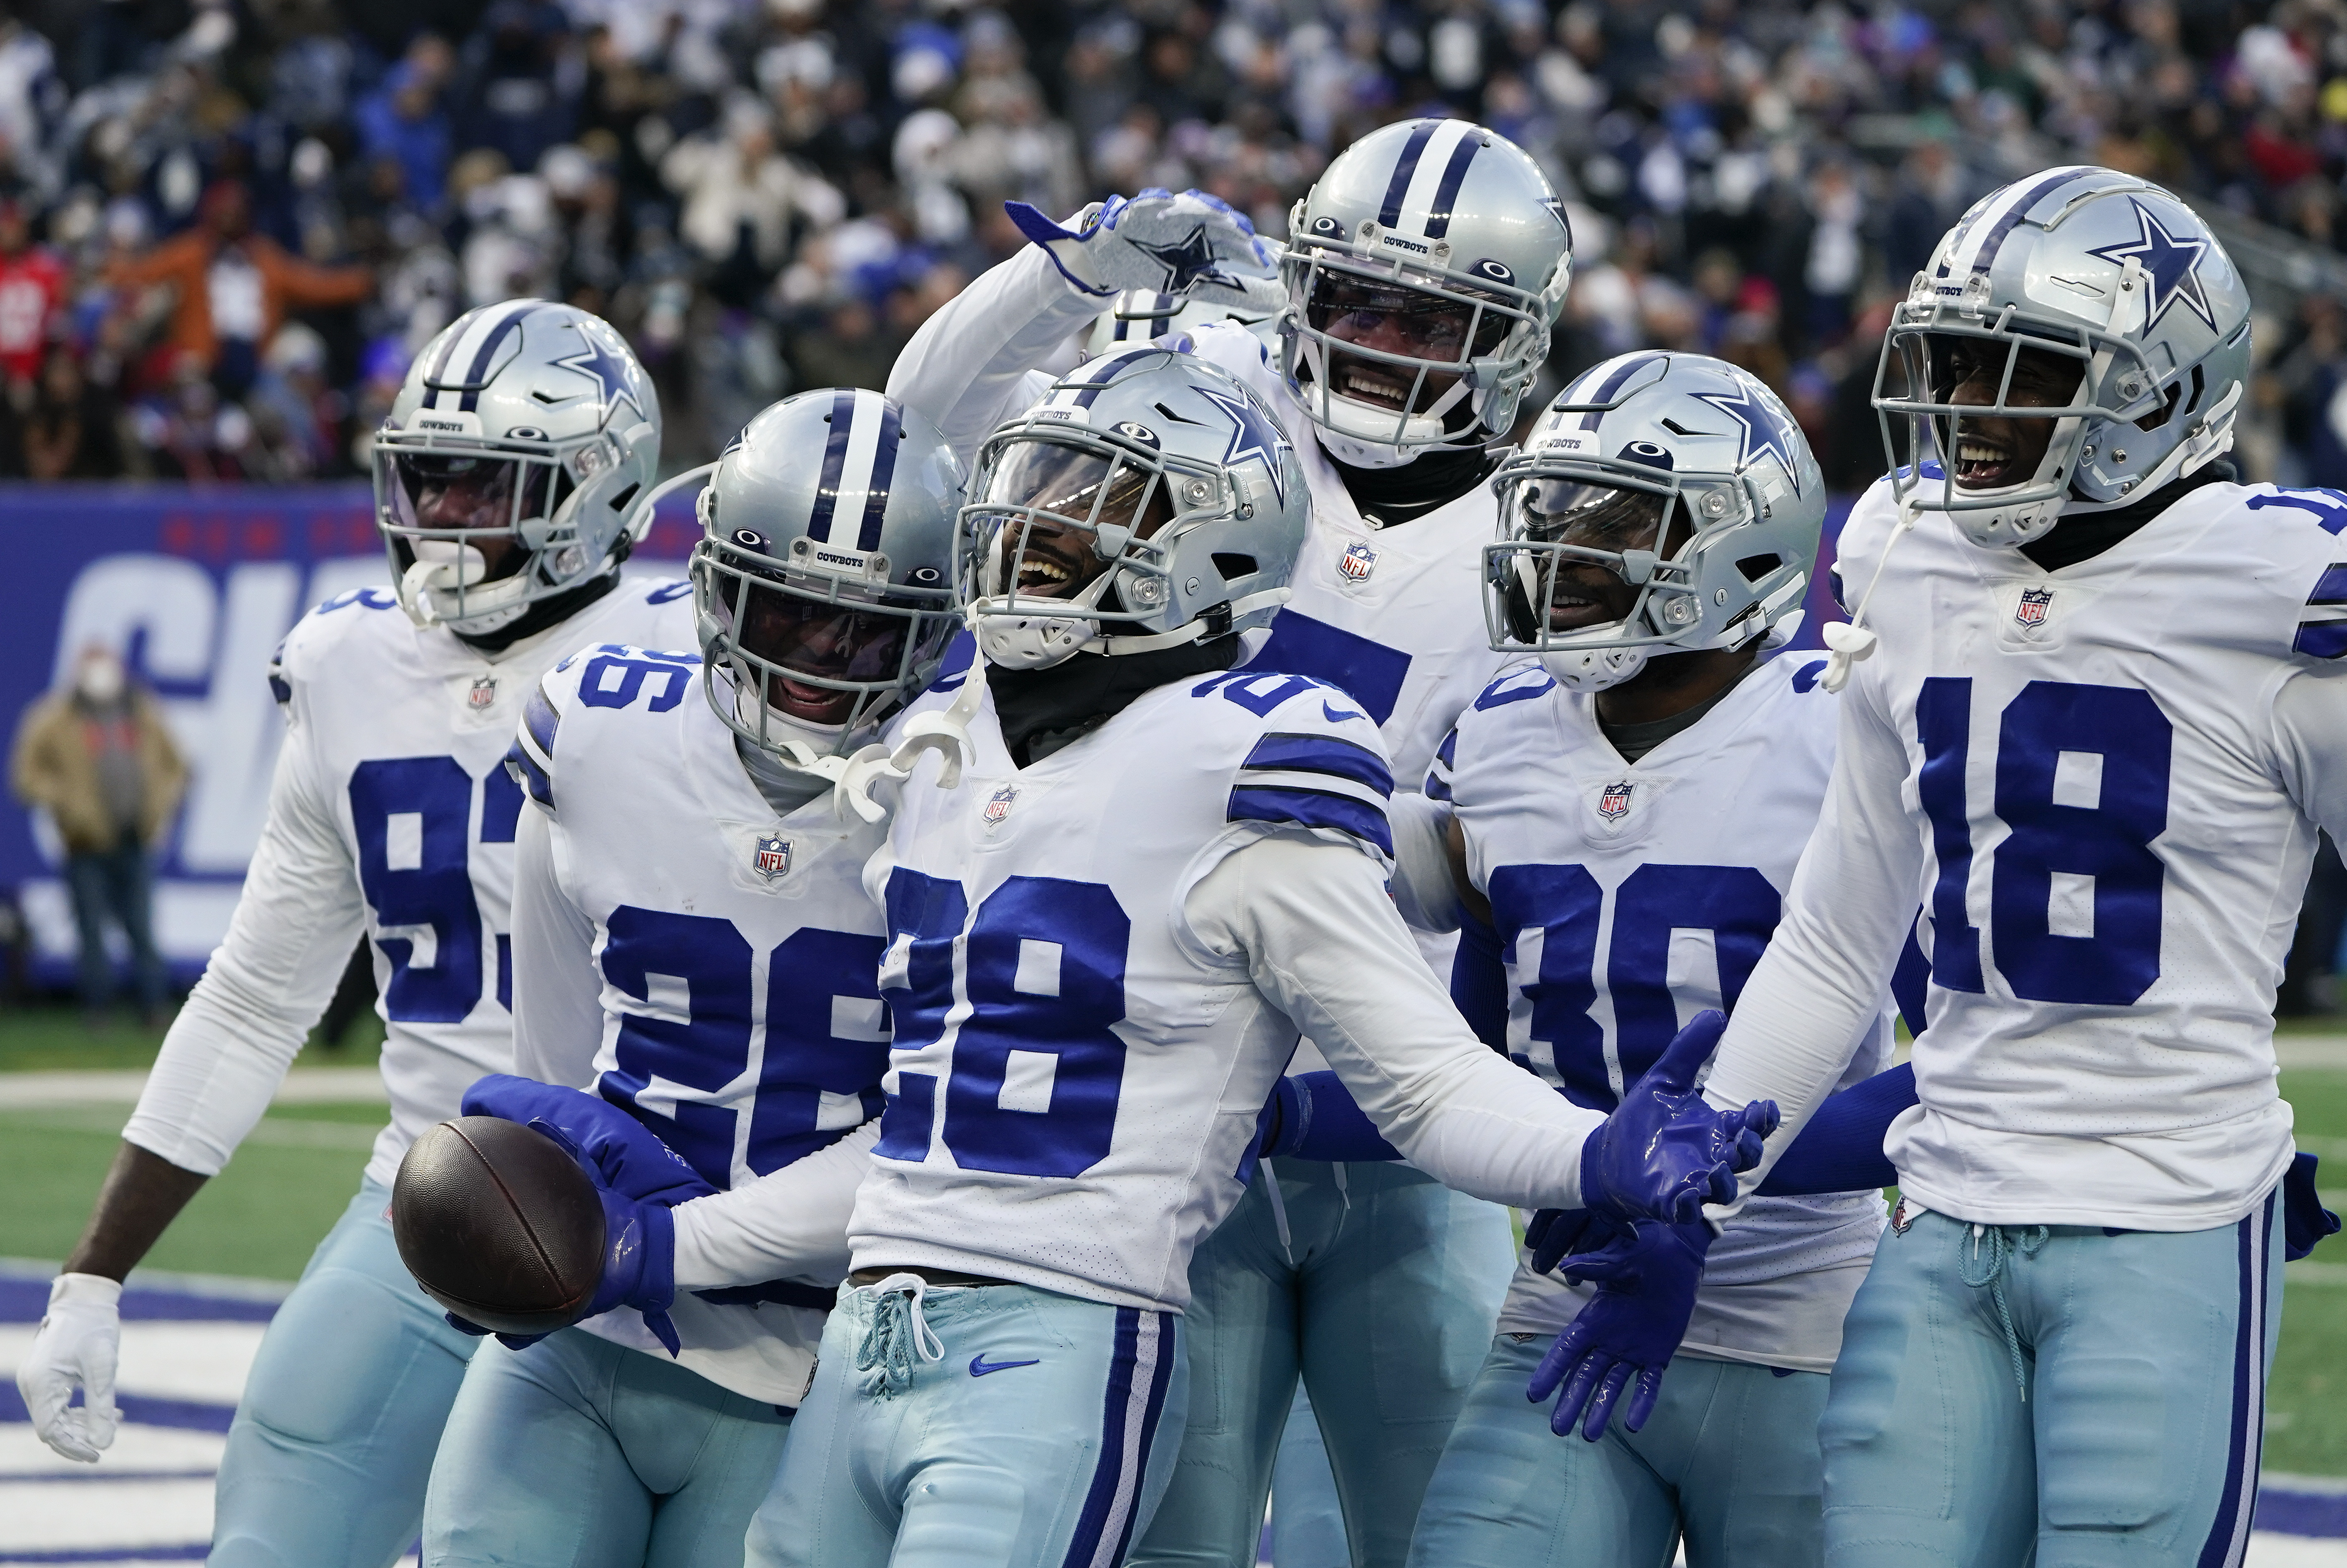 Defense's day: Cowboys force 4 turnovers, rip Giants